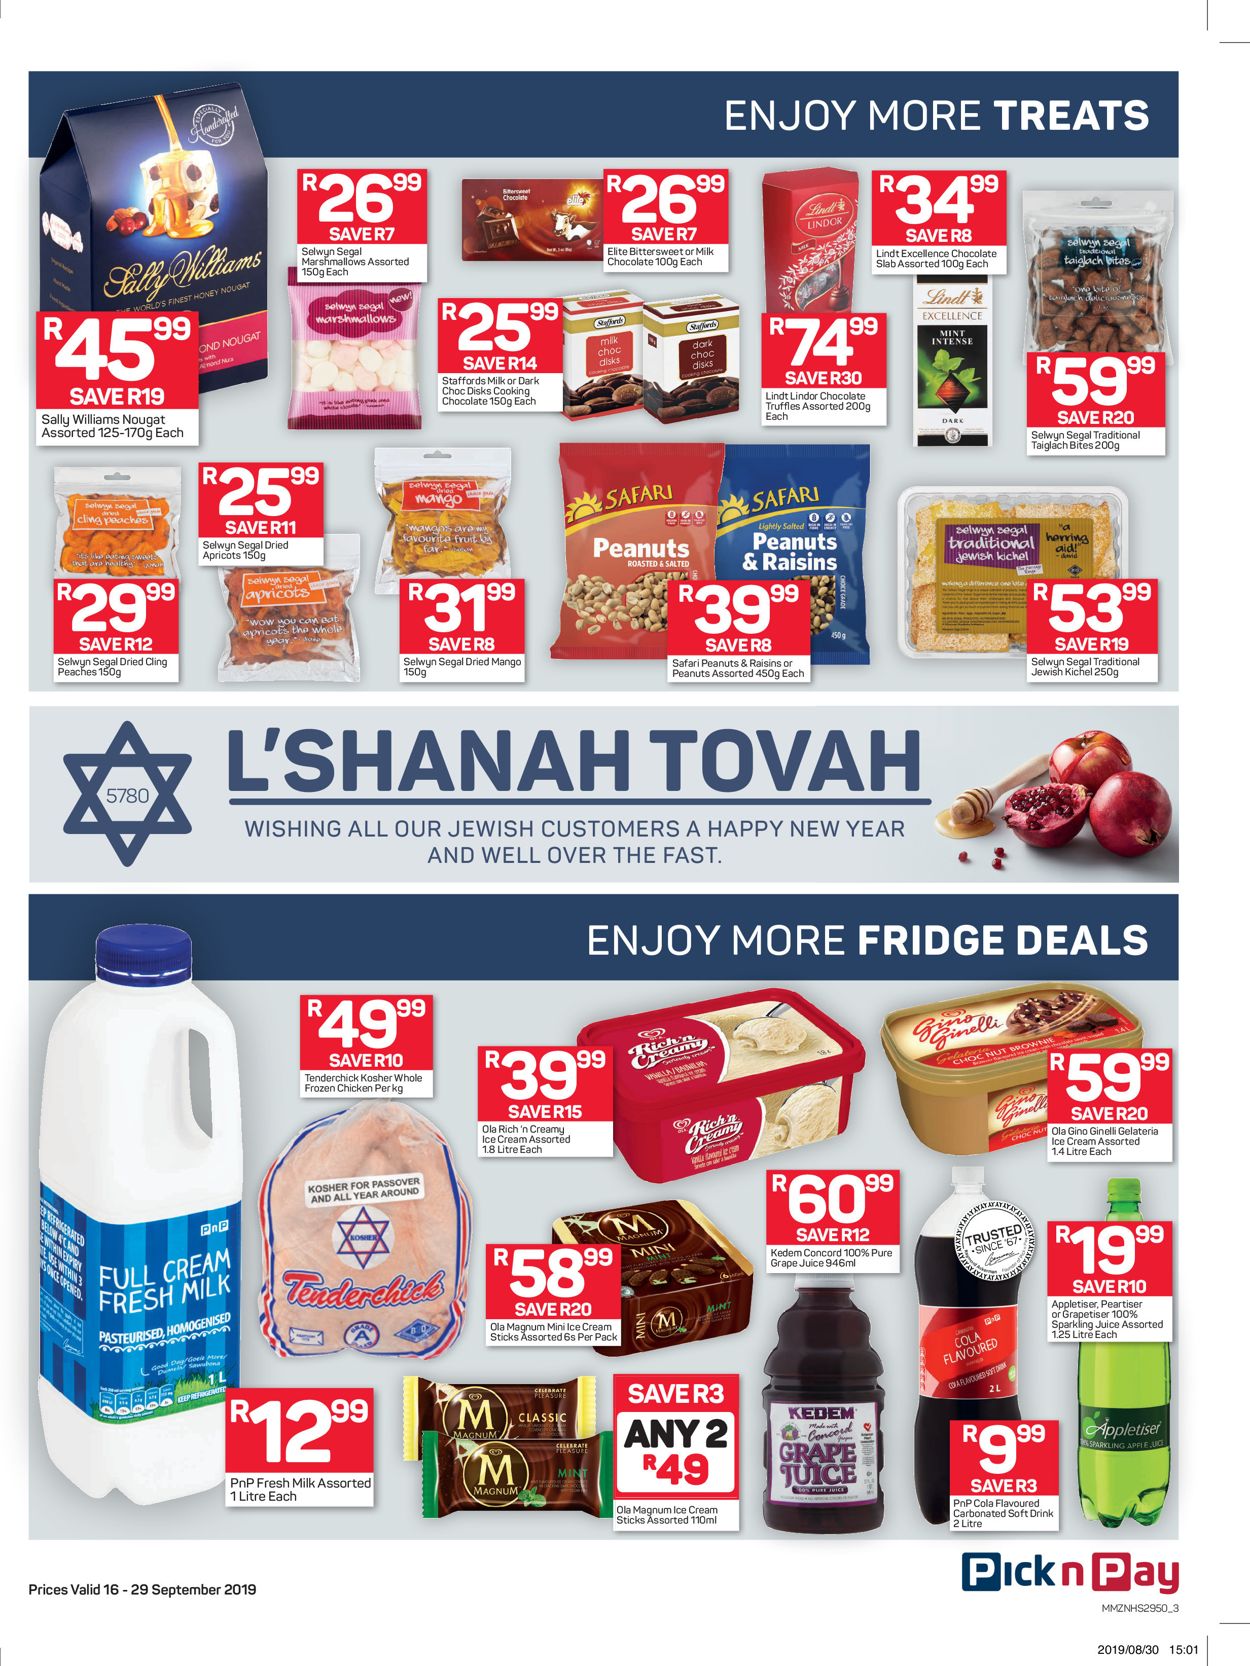 Pick n Pay Catalogue - 2019/09/16-2019/09/29 (Page 4)